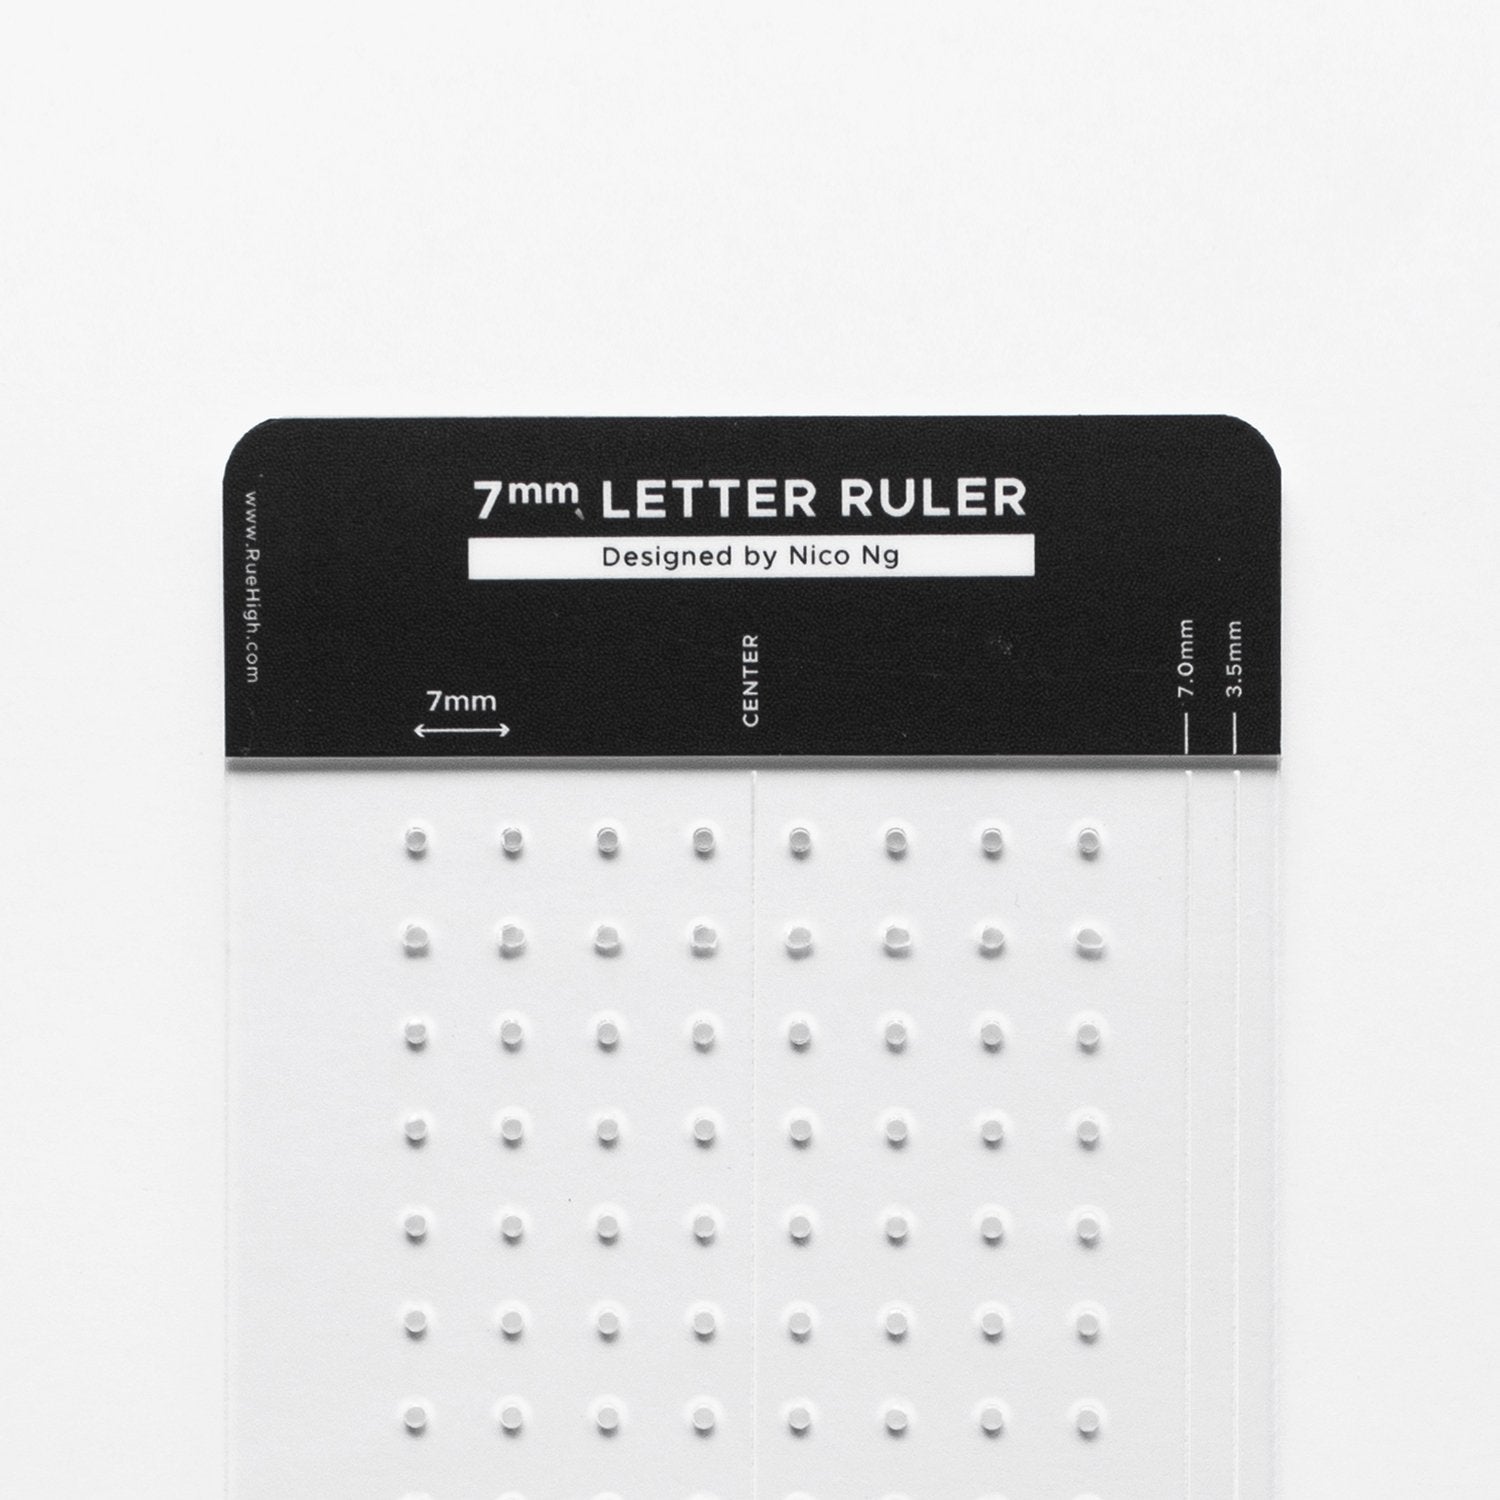 RUEHIGH Letter Ruler 7mm by Nico Ng